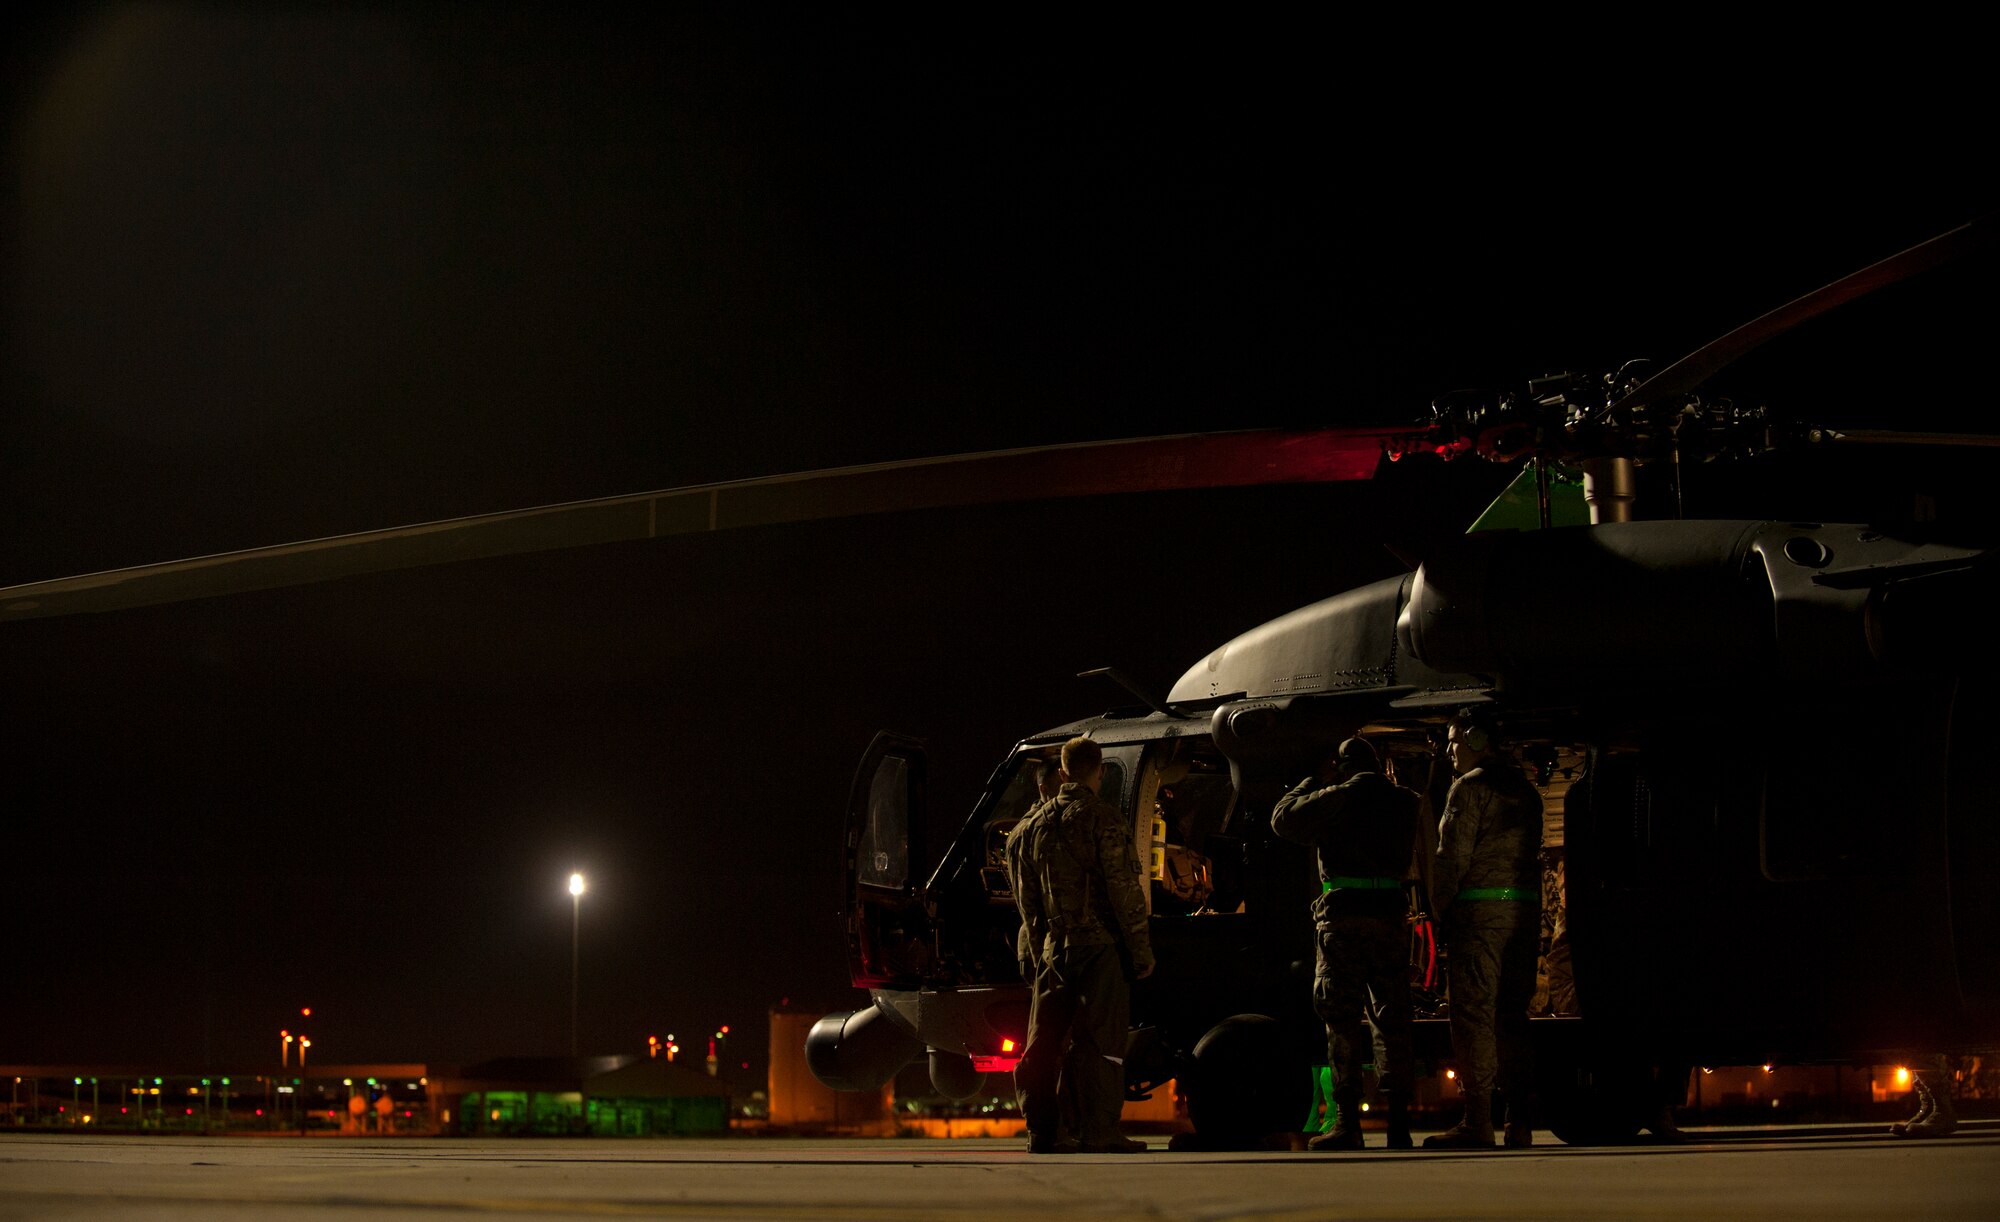 An HH-60G Pave Hawk assigned to the 66th Rescue Squadron is serviced by maintainers prior to a Red Flag 15-1 personnel recovery training scenario at Nellis Air Force Base, Nev., Feb. 5, 2015. The Pave Hawk is a four bladed, twin engine, single-rotor helicopter that is designed to carry a crew of four and a combat-equipped squad of 11 or an equal cargo load. (U.S. Air Force photo by Airman 1st Class Joshua Kleinholz)